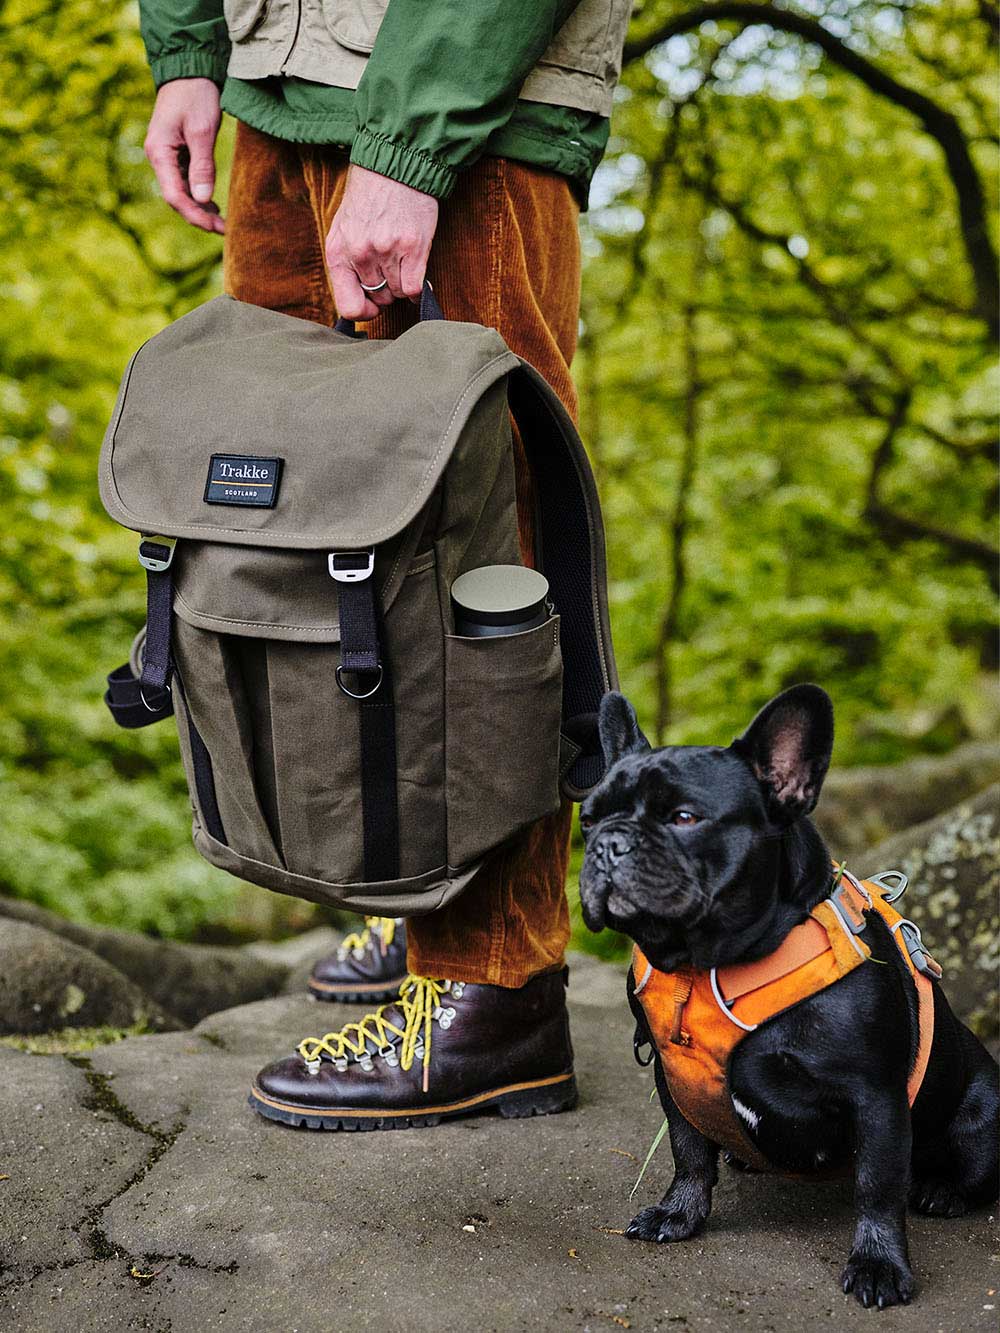 A man is holding the Trakke Bannoch in Olive against his leg, the man is standing on a rock in a woodland area outside. There is also a small Frenchie dog wearing a harness,